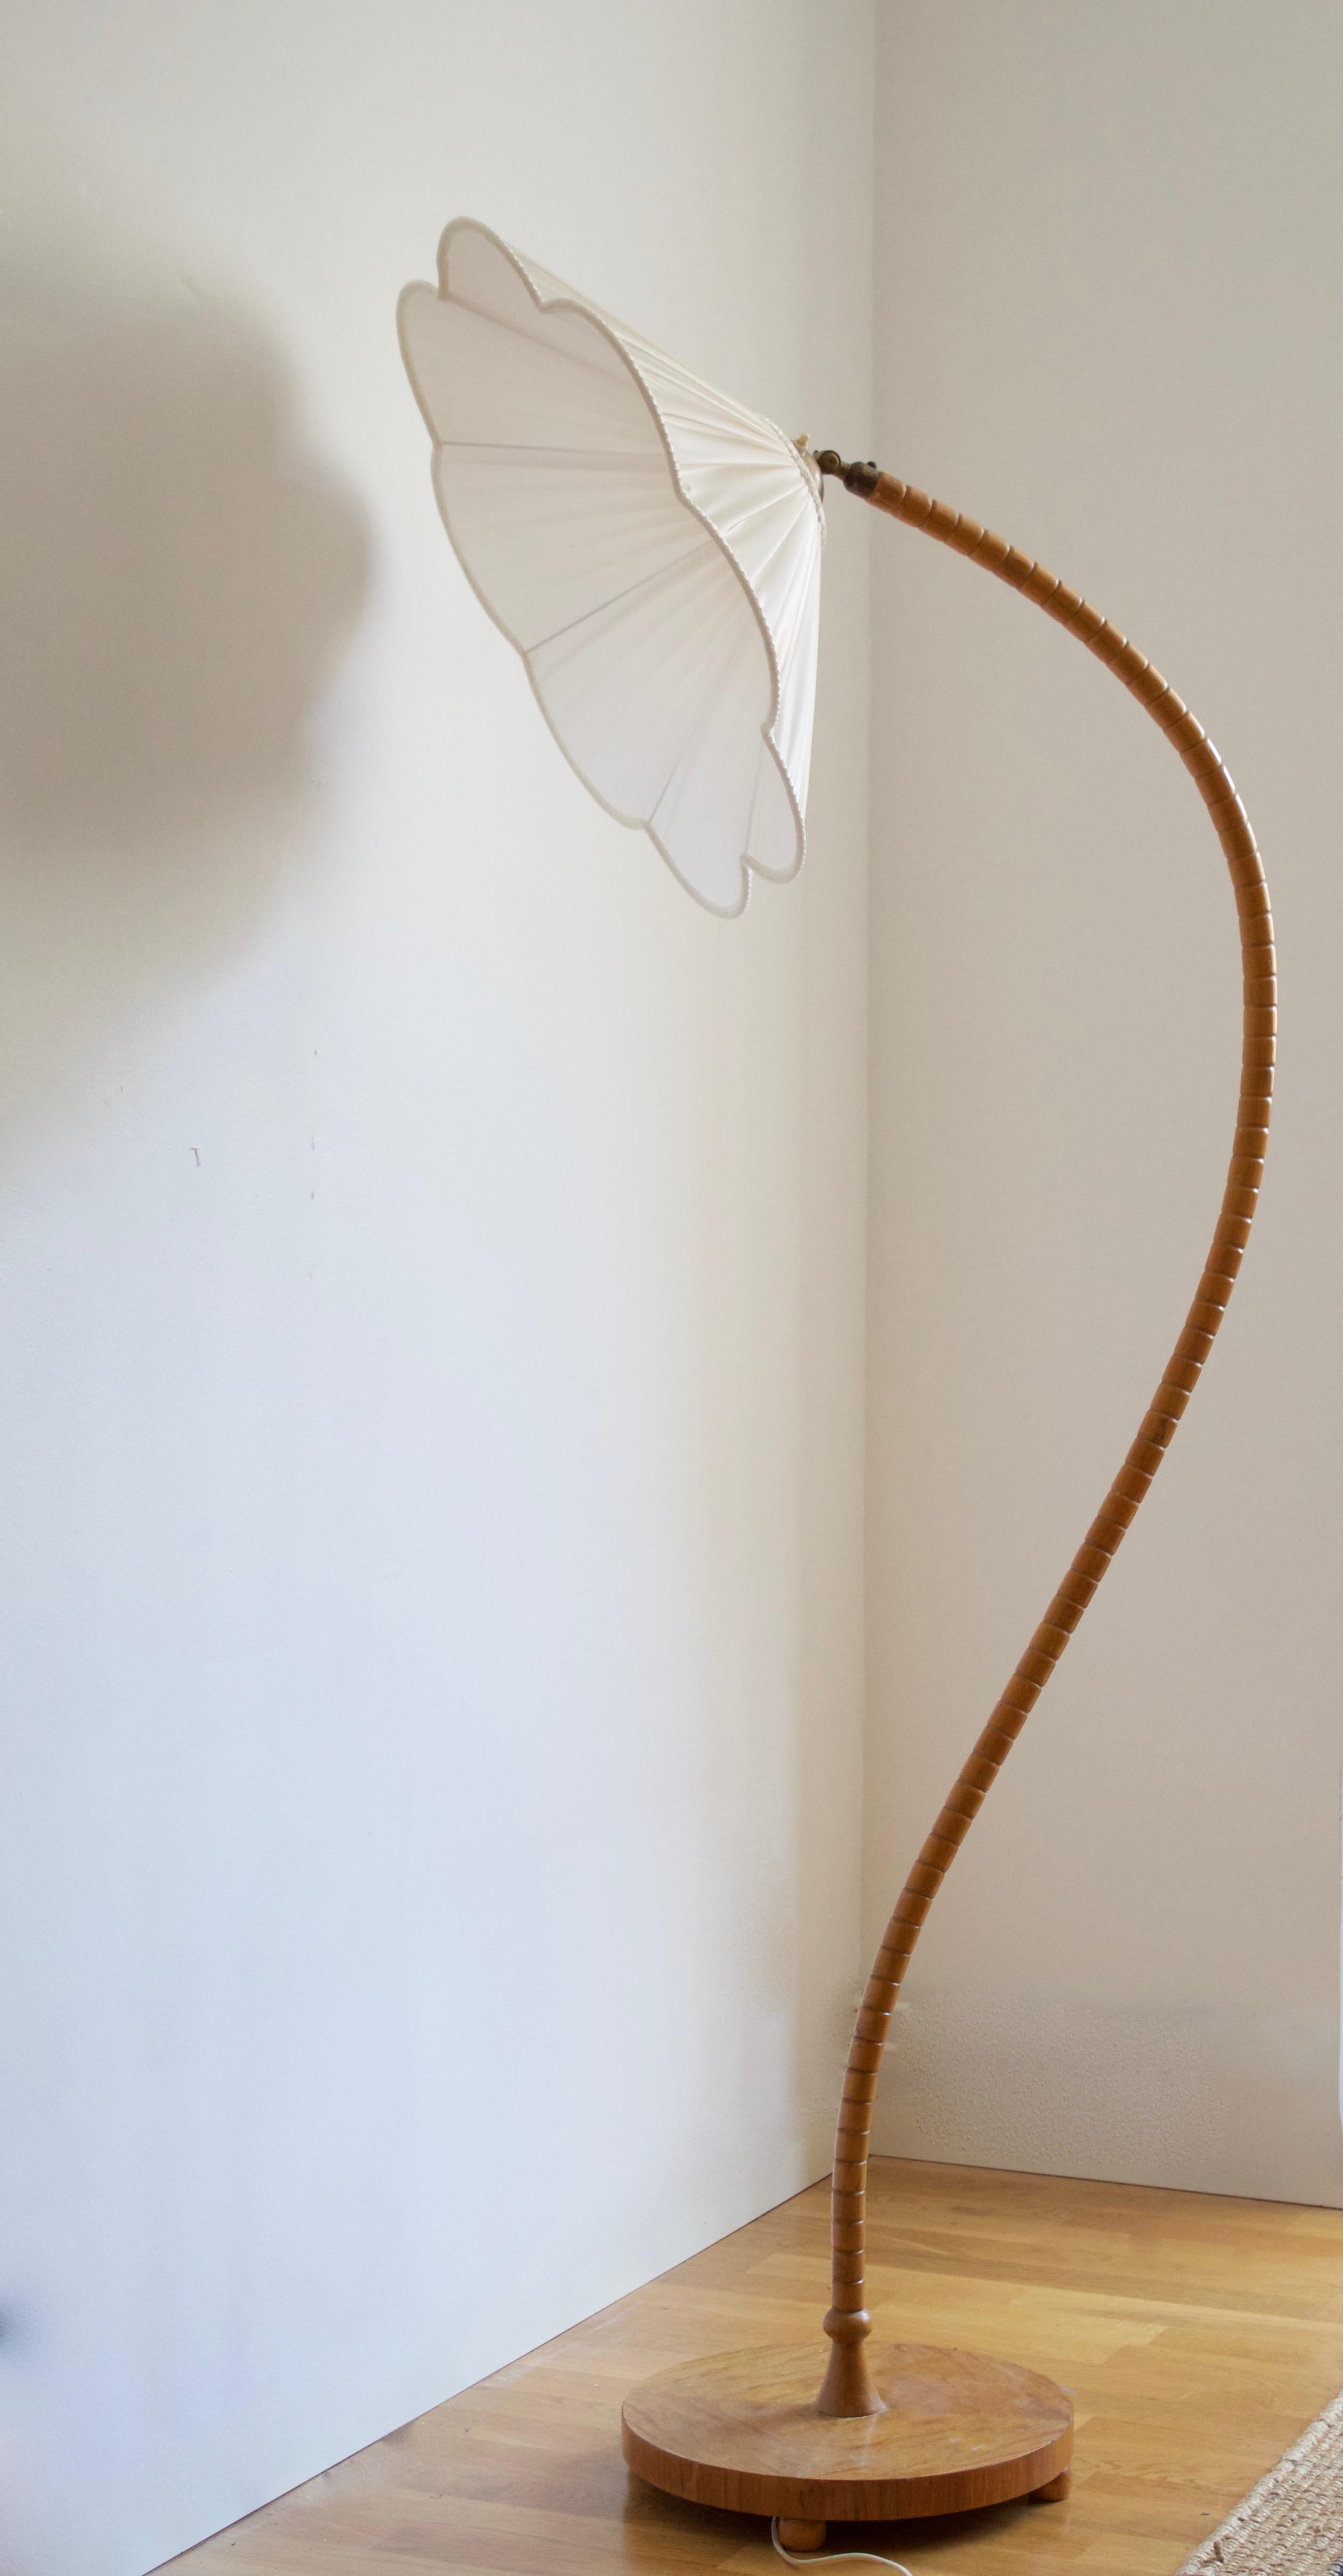 An organic floor lamp. Designed by an unknown Swedish modernist designer, 1930s. Produced in birch, fabric, and brass. Brand new high-end lampshade.

Other designers working in the organic style include Jean Royère, Gio Ponti, Vladimir Kagan, Ico